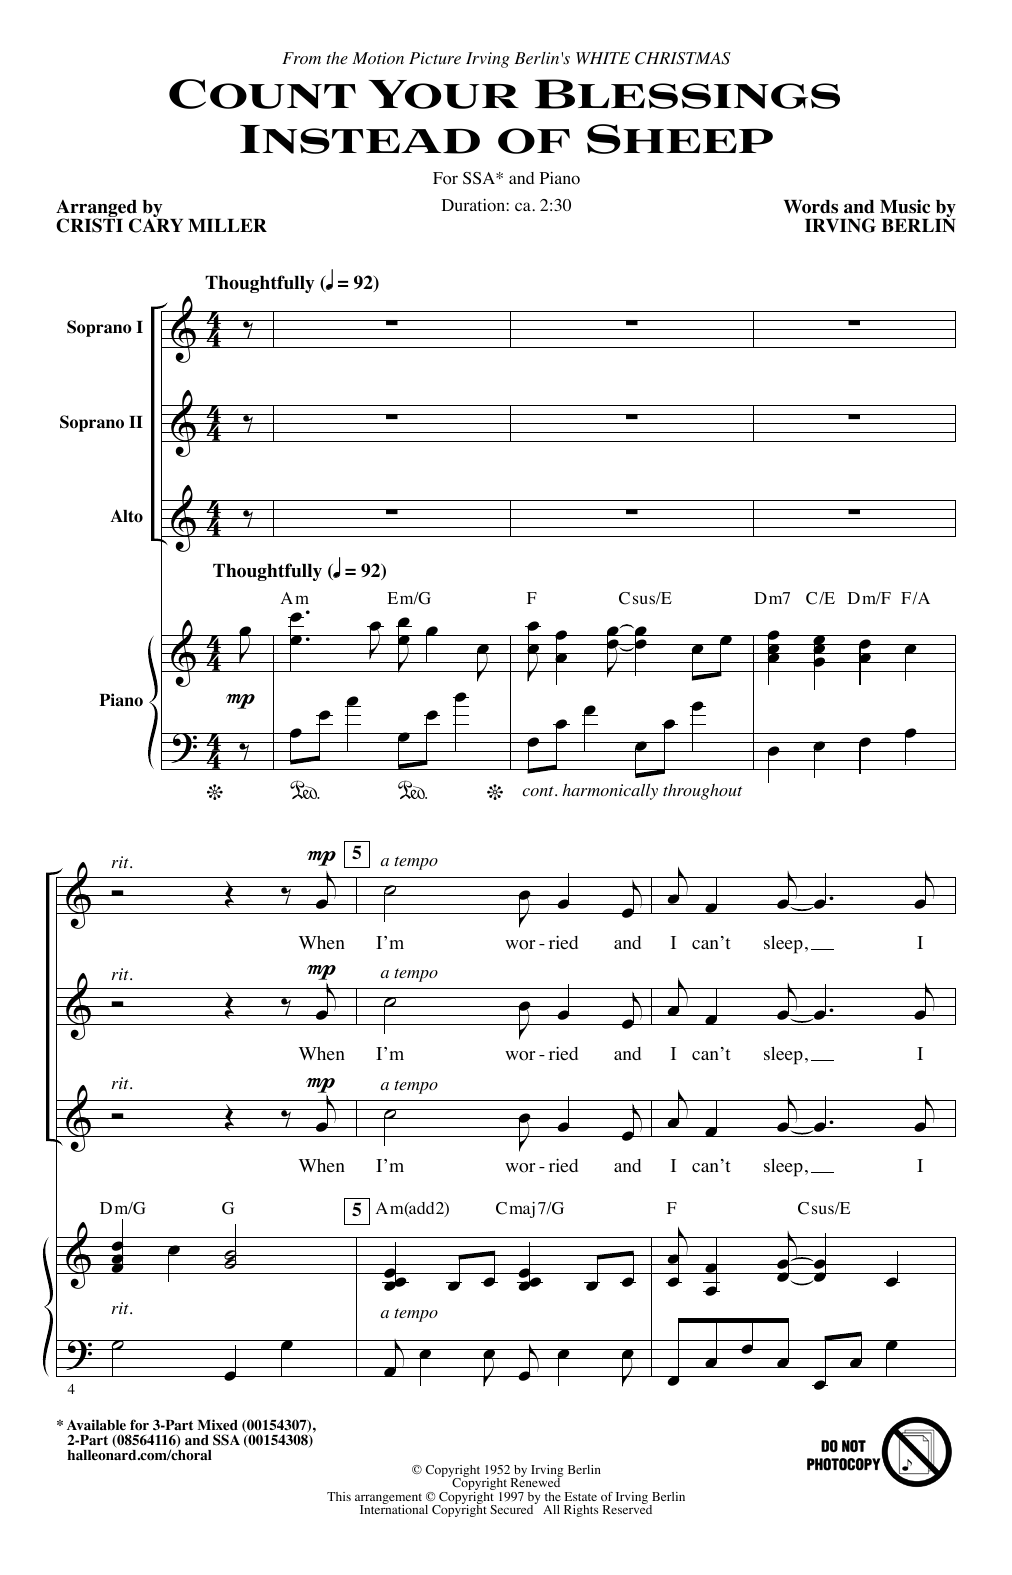 Download Irving Berlin Count Your Blessings Instead Of Sheep ( Sheet Music